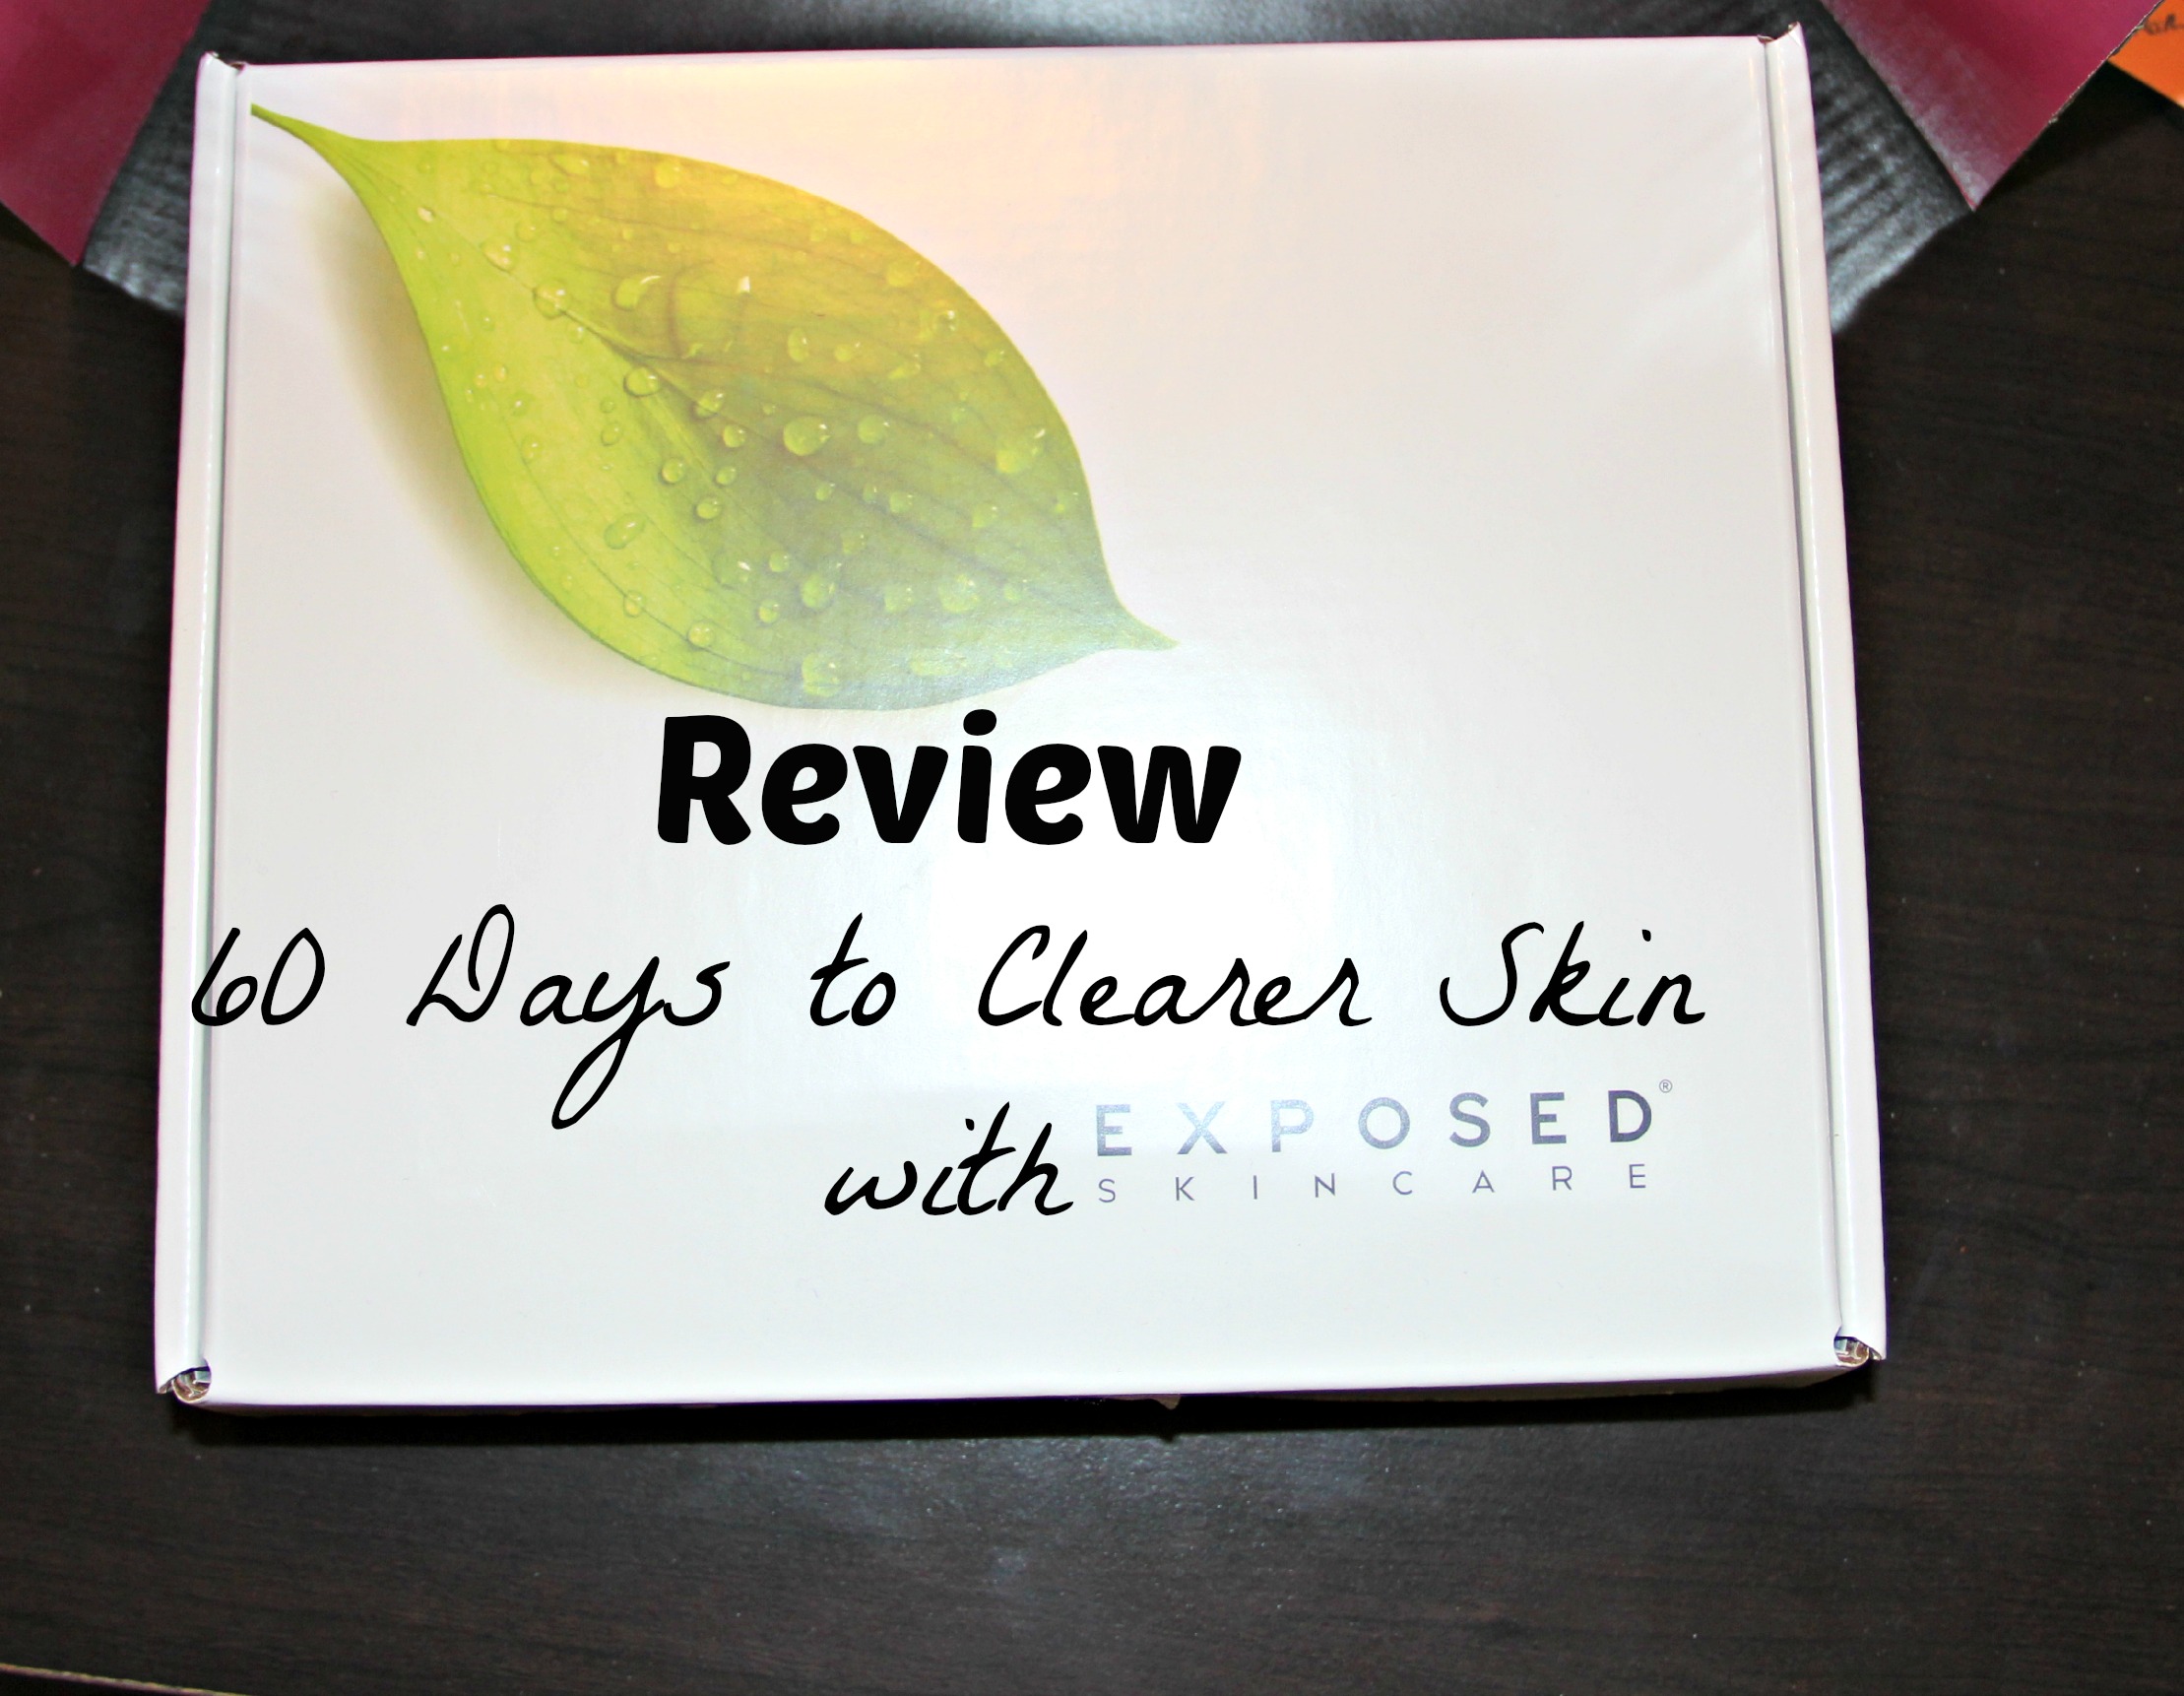 Review: 60 Days to Clearer Skin with Exposed Skincare